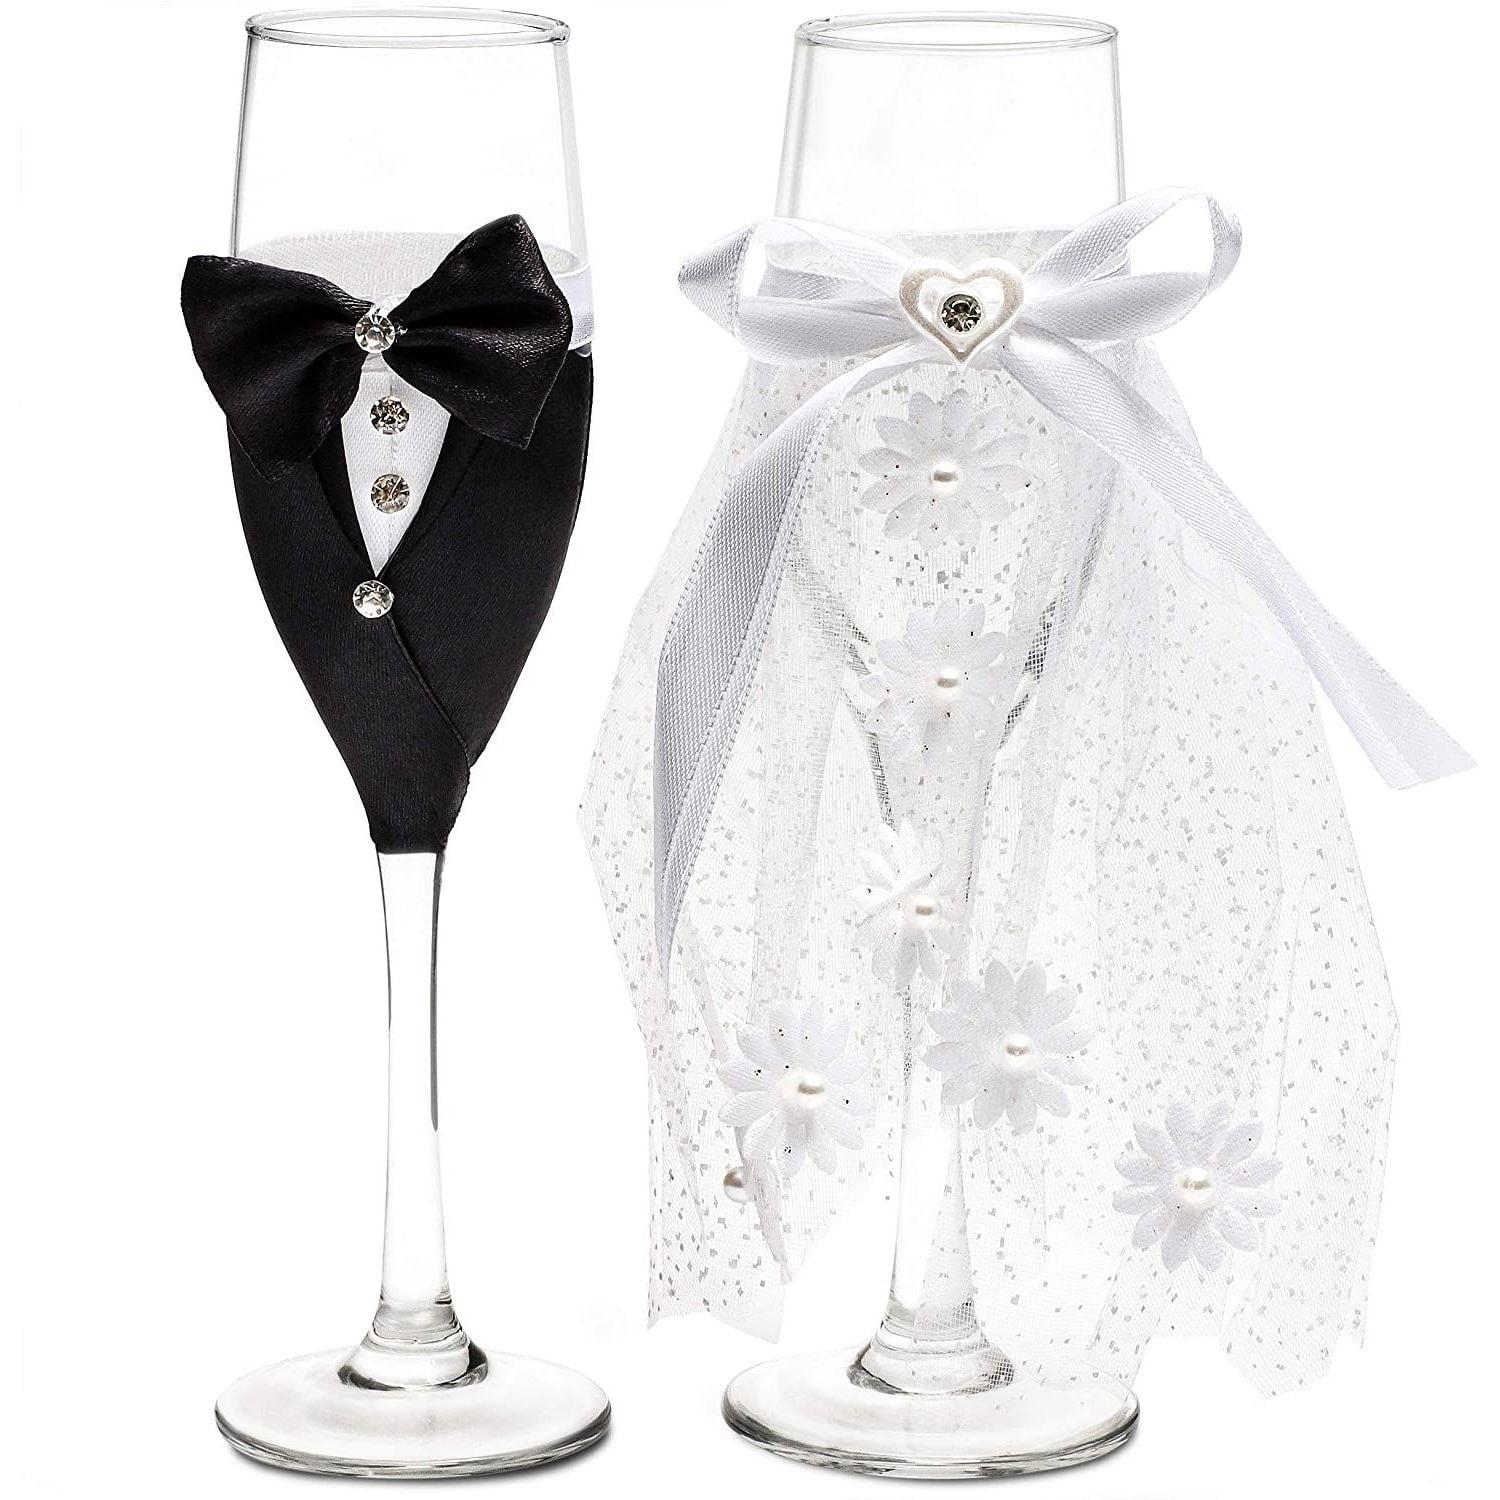 https://ak1.ostkcdn.com/images/products/is/images/direct/8fd7da567f5bb69745a54d6a05b2f2bf58066d66/Bride-and-Groom-Champagne-Flutes%2C-Wedding-Dress-Tuxedo-Toasting-Glasses-Gift-Set.jpg